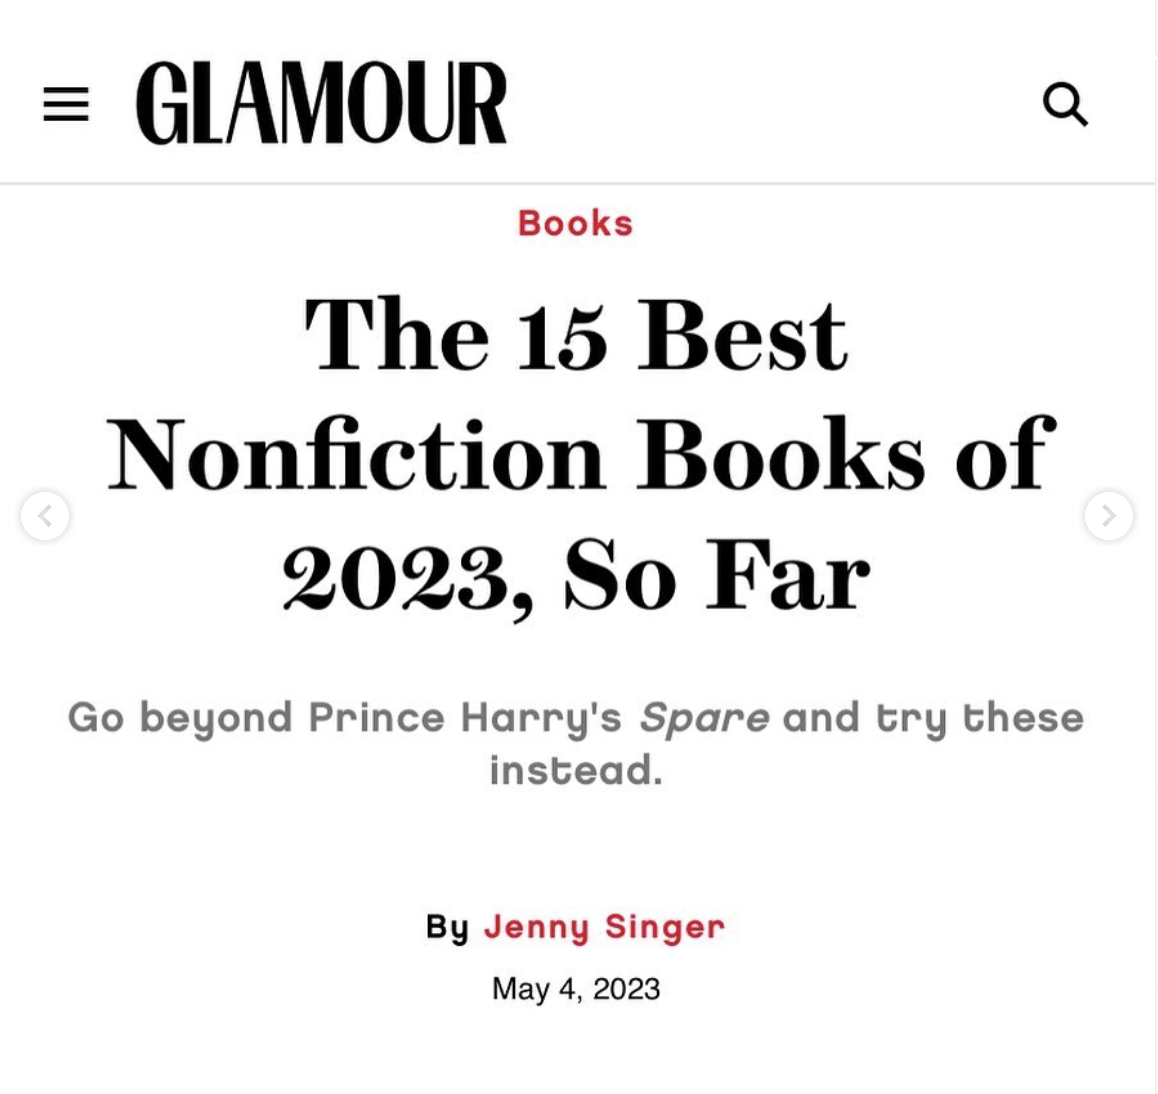 GLAMOUR: 15 Best Nonfiction Books of 2023